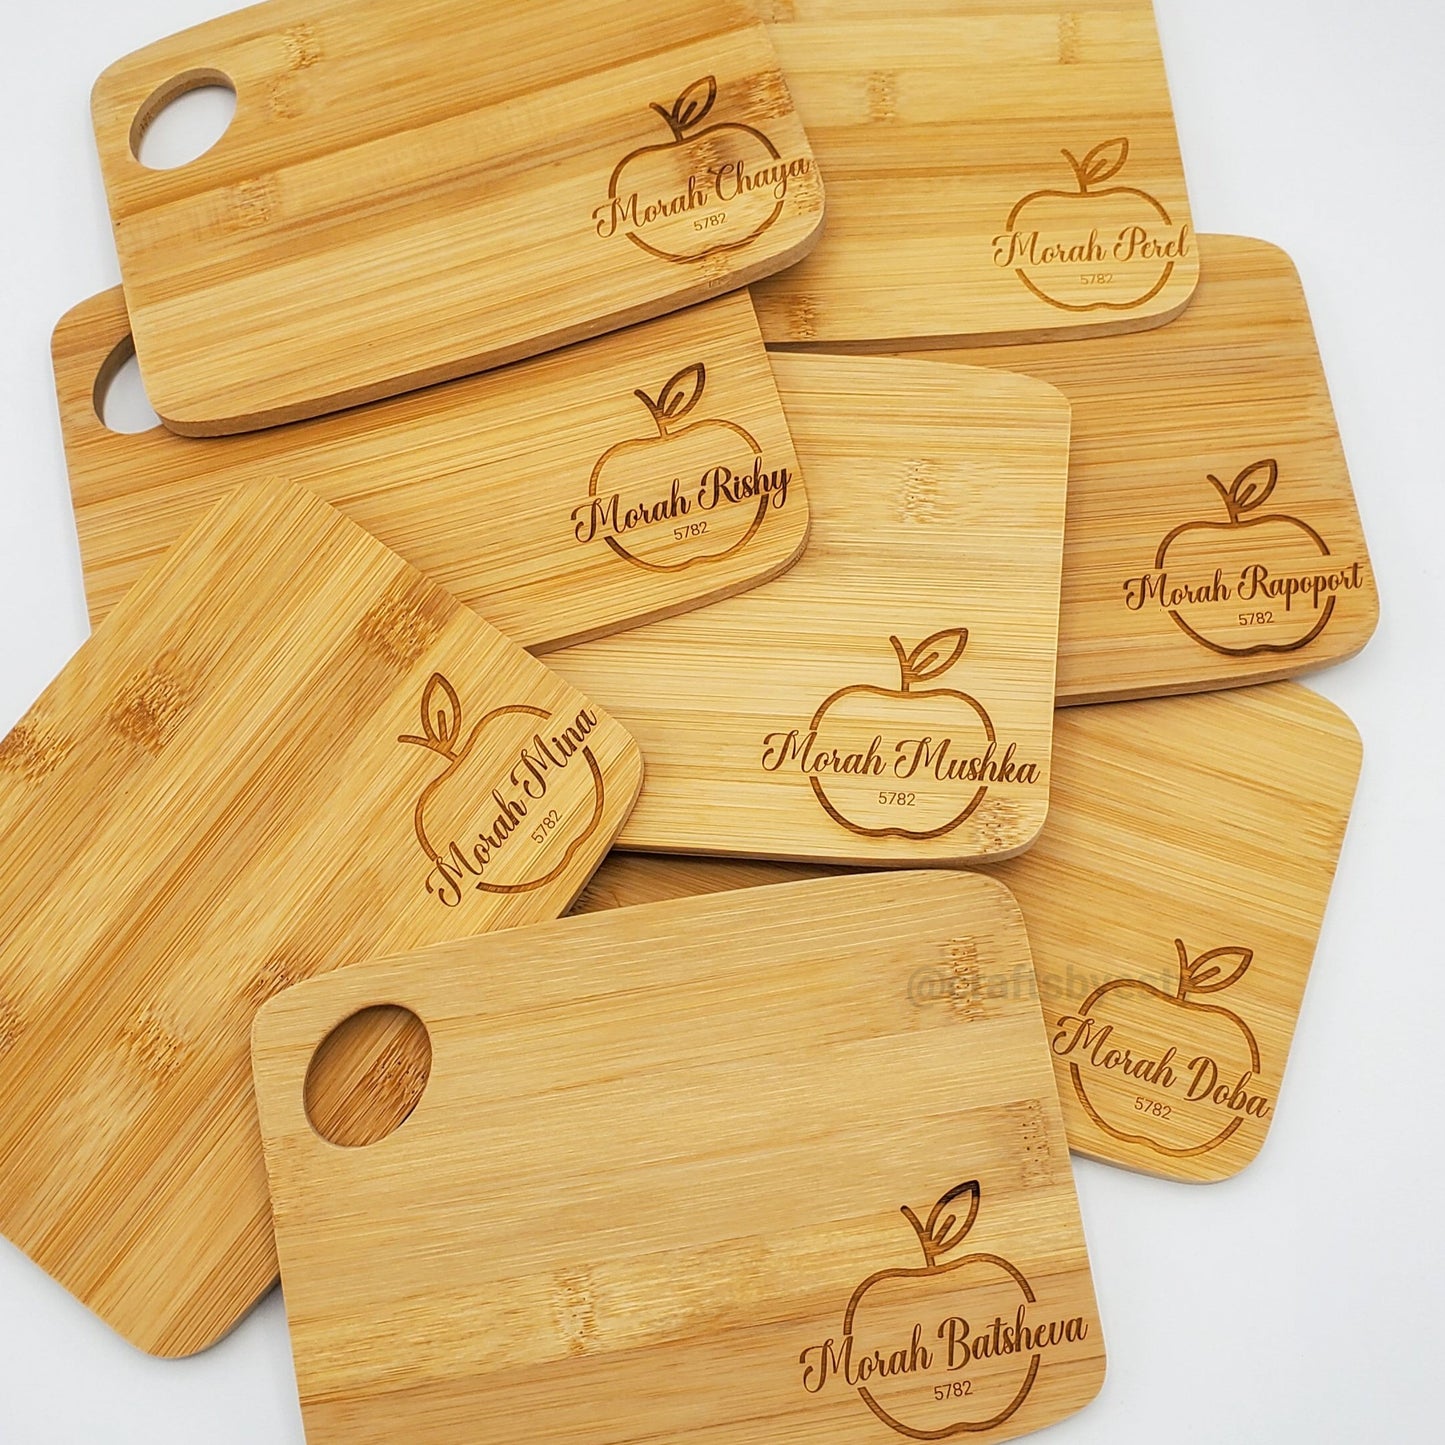 Personalized Teacher's Gift- Personal Charcuterie Board